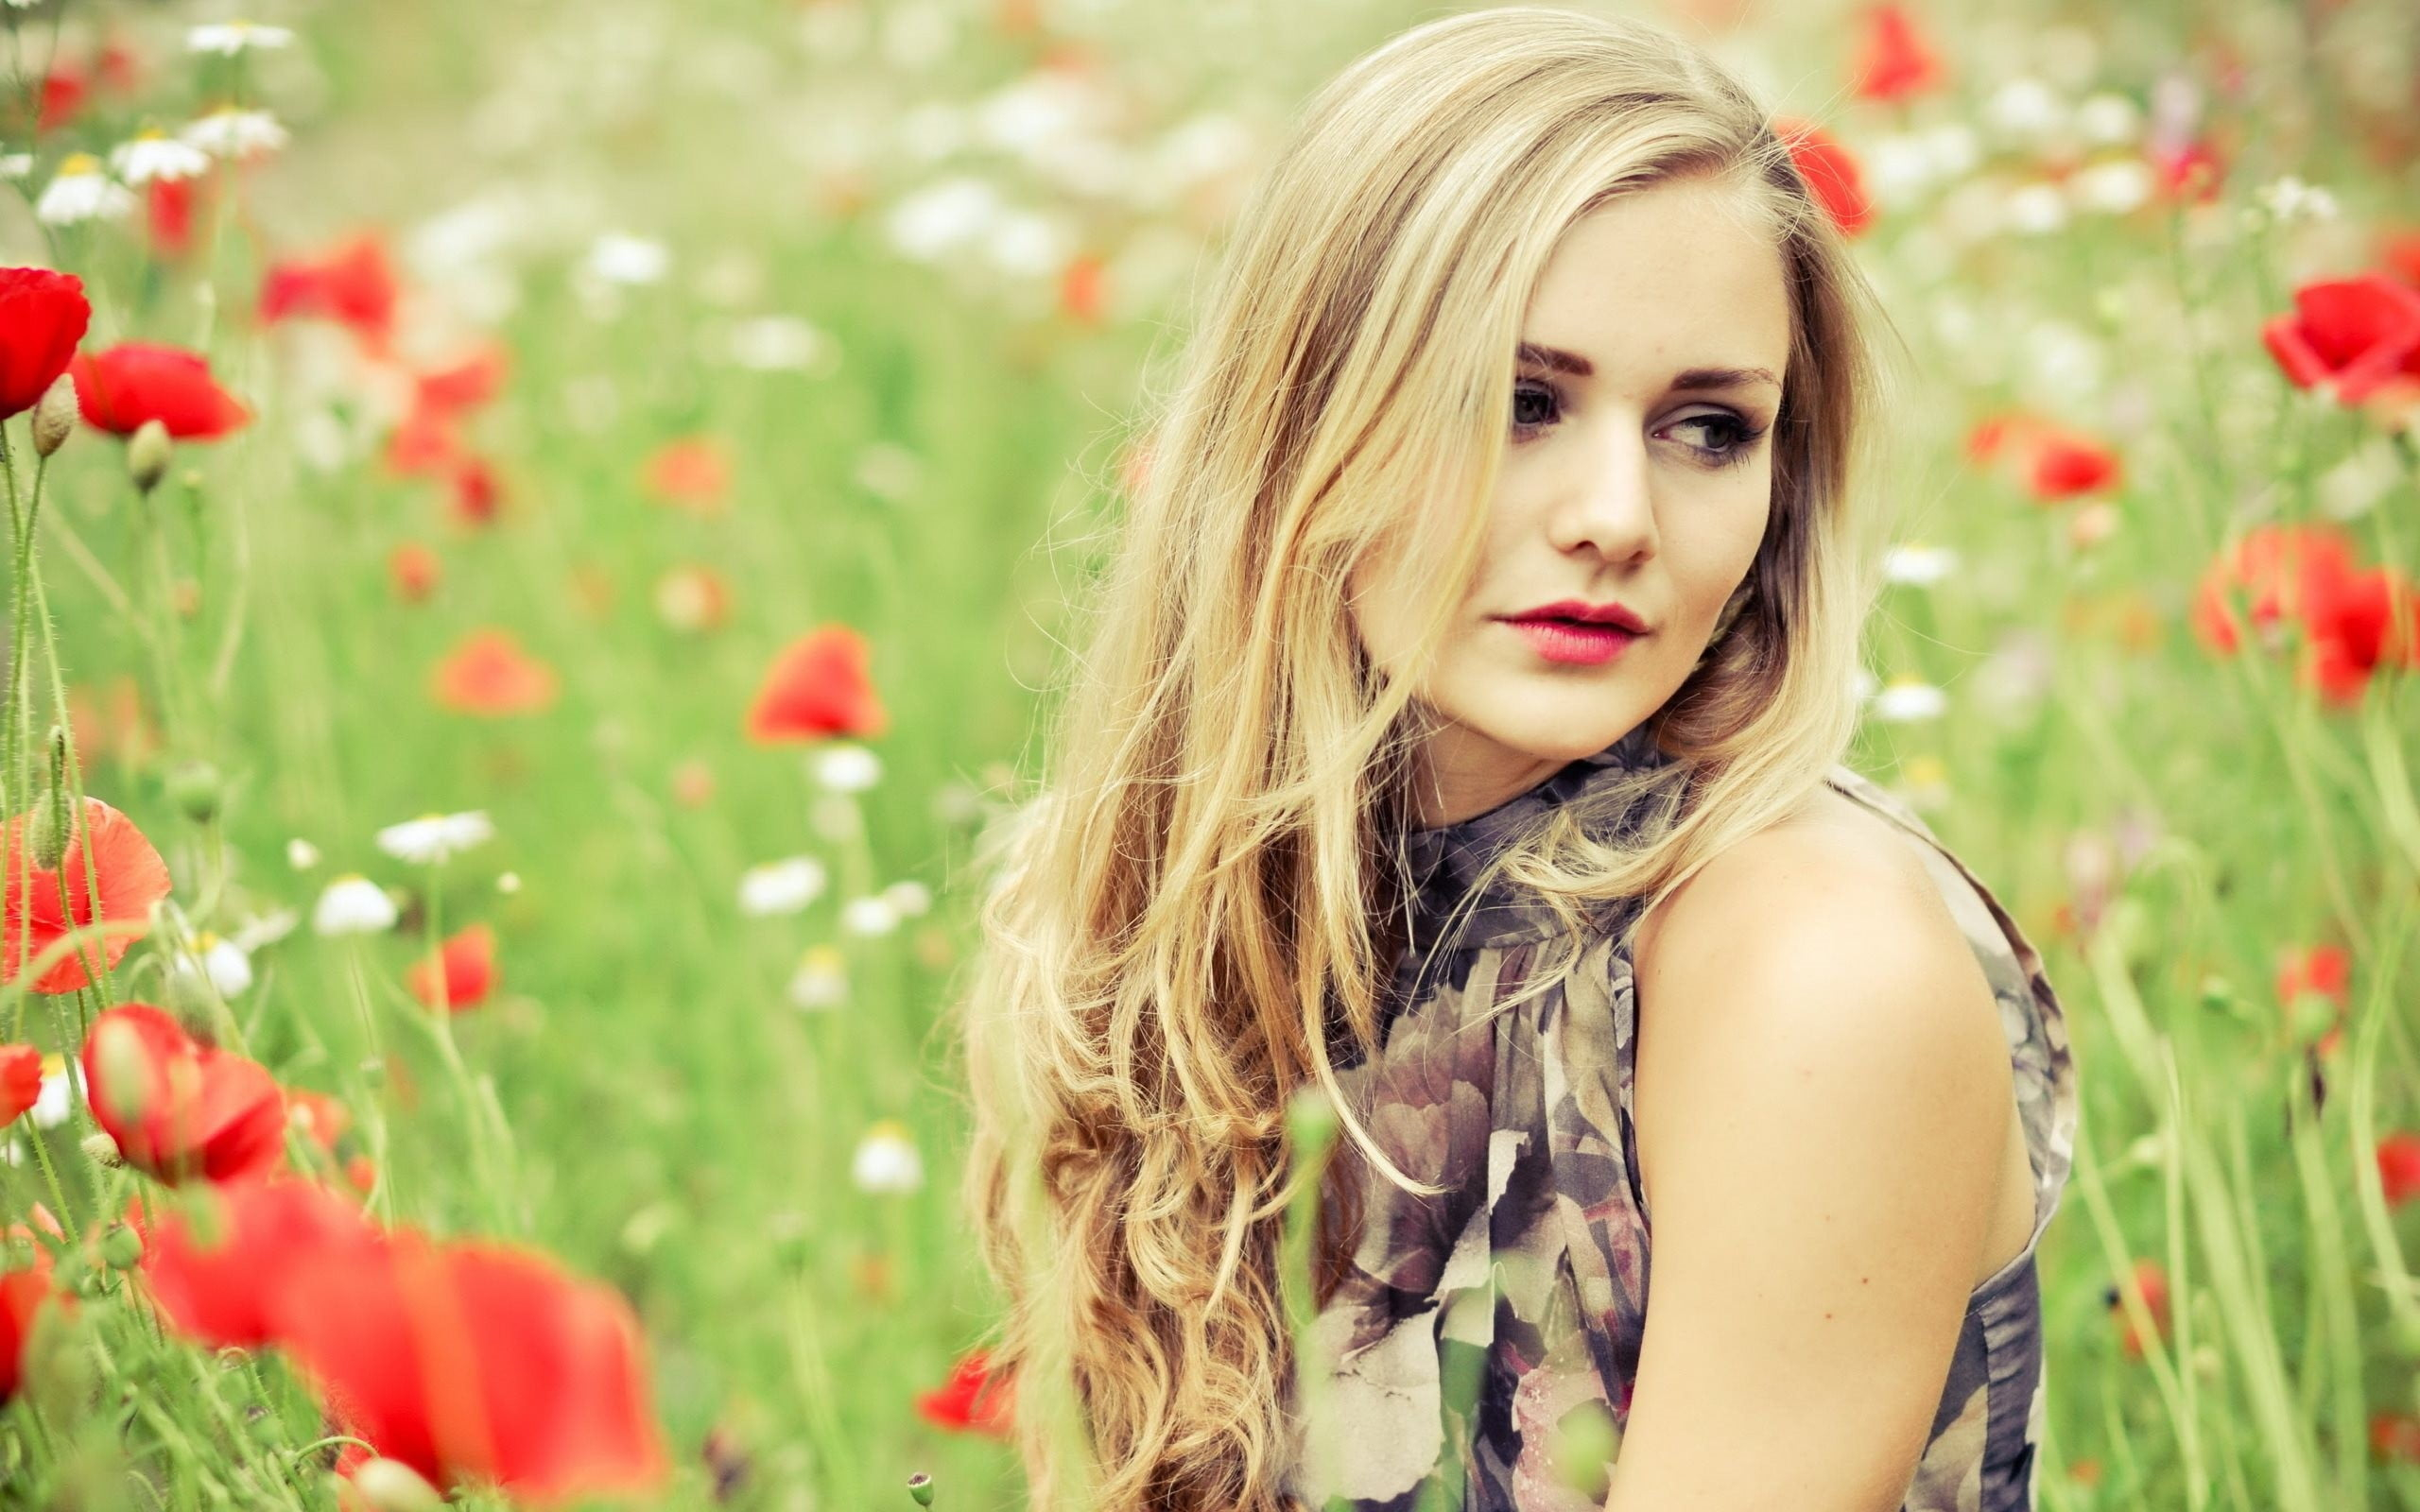 2560x1600 Woman wearing black and grey sleeveless tops on red poppy flower field during daytime HD wallpaper